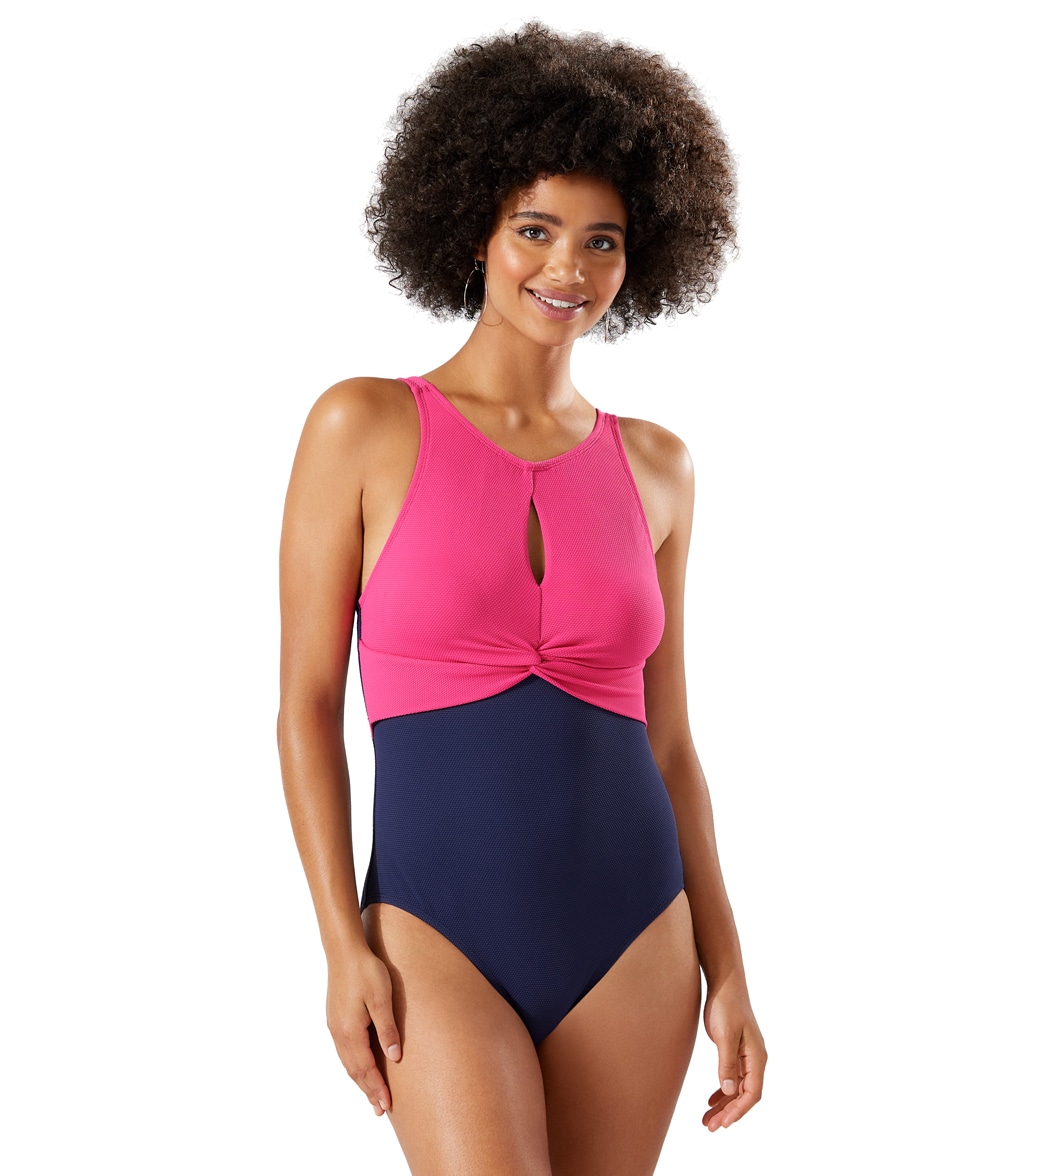 Tommy Bahama Women's Island Cays Solids High Neck One Piece Swimsuit - Pasison Pink 10 - Swimoutlet.com